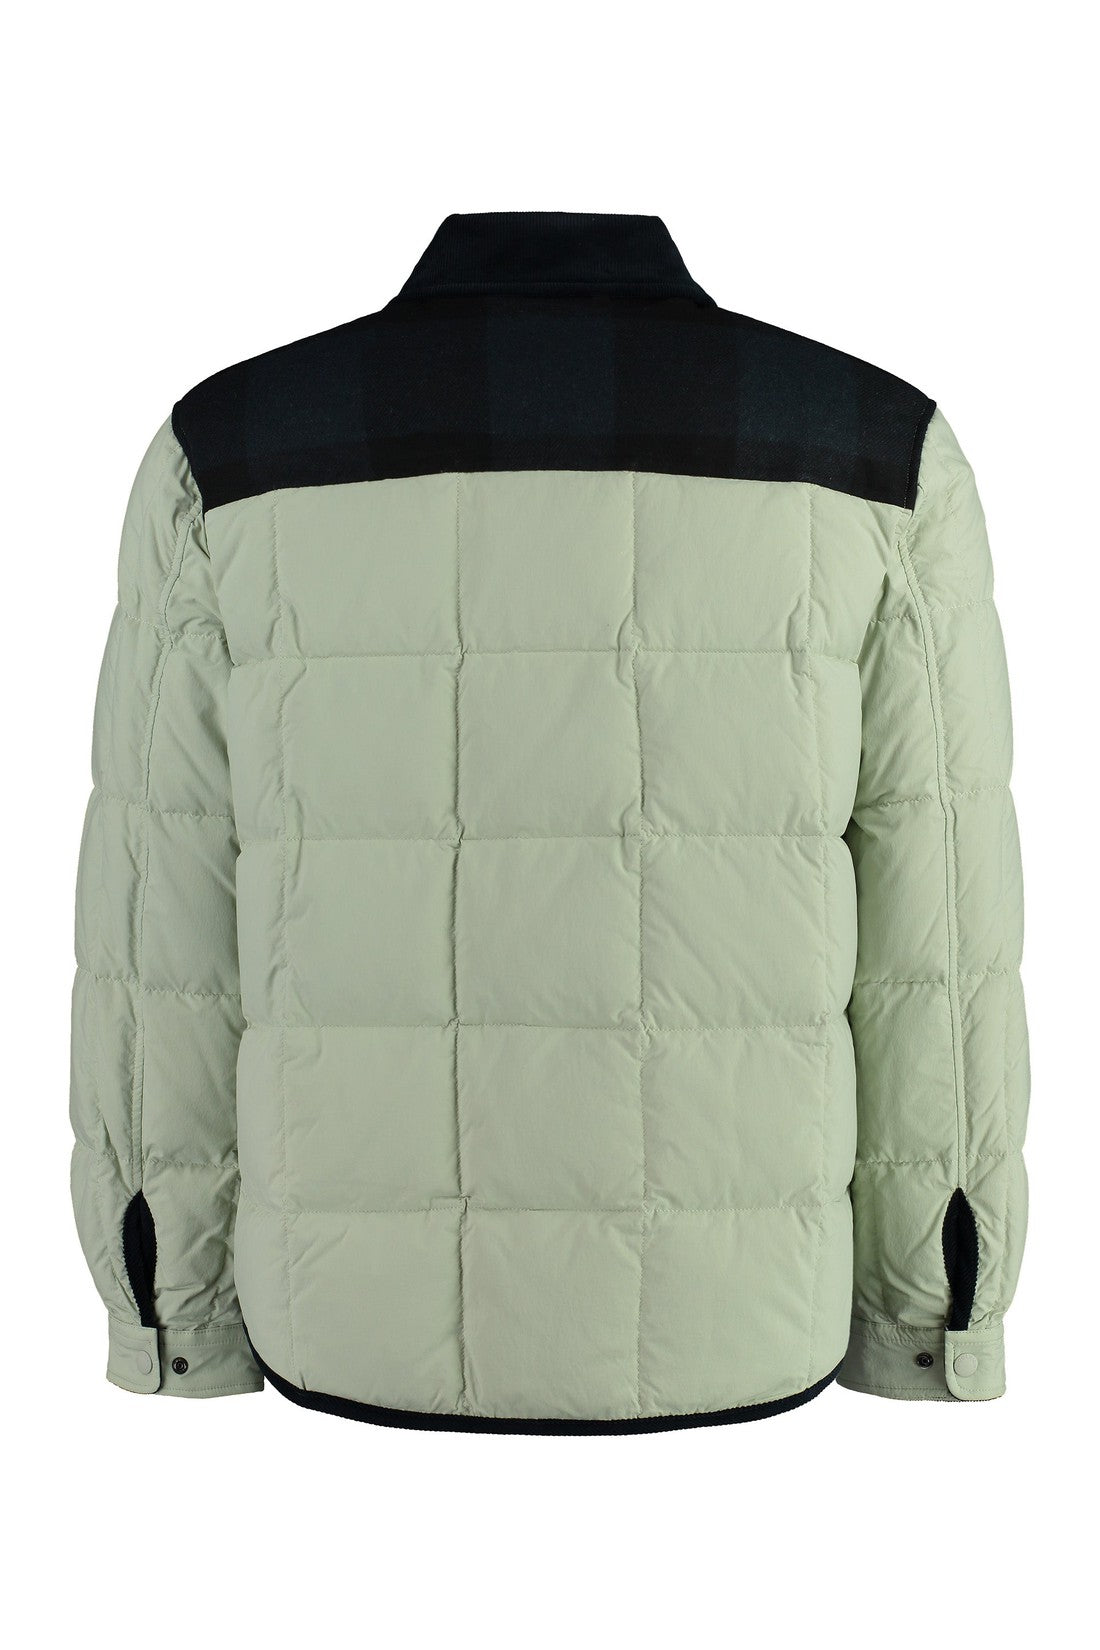 Woolrich-OUTLET-SALE-Heritage Terrain padded jacket-ARCHIVIST